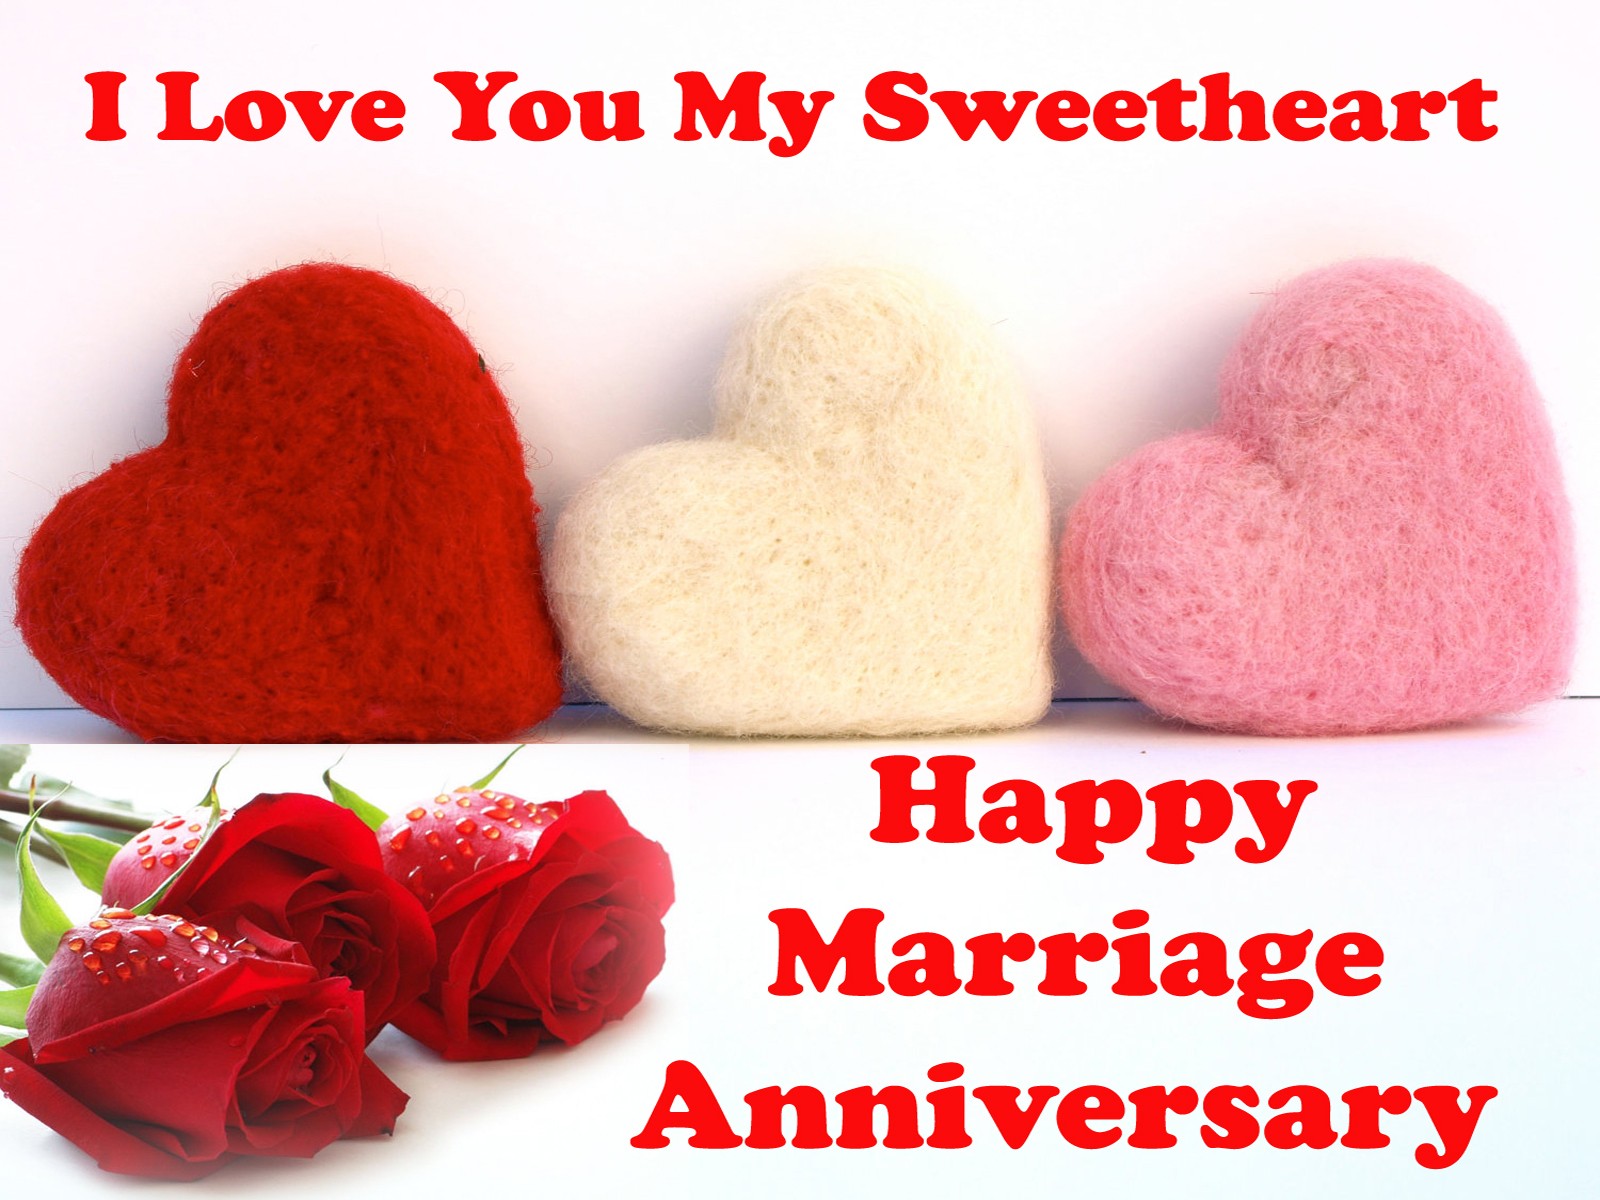 Happy Marriage Anniversary Sweetheart - Wishes, Greetings, Pictures – Wish  Guy